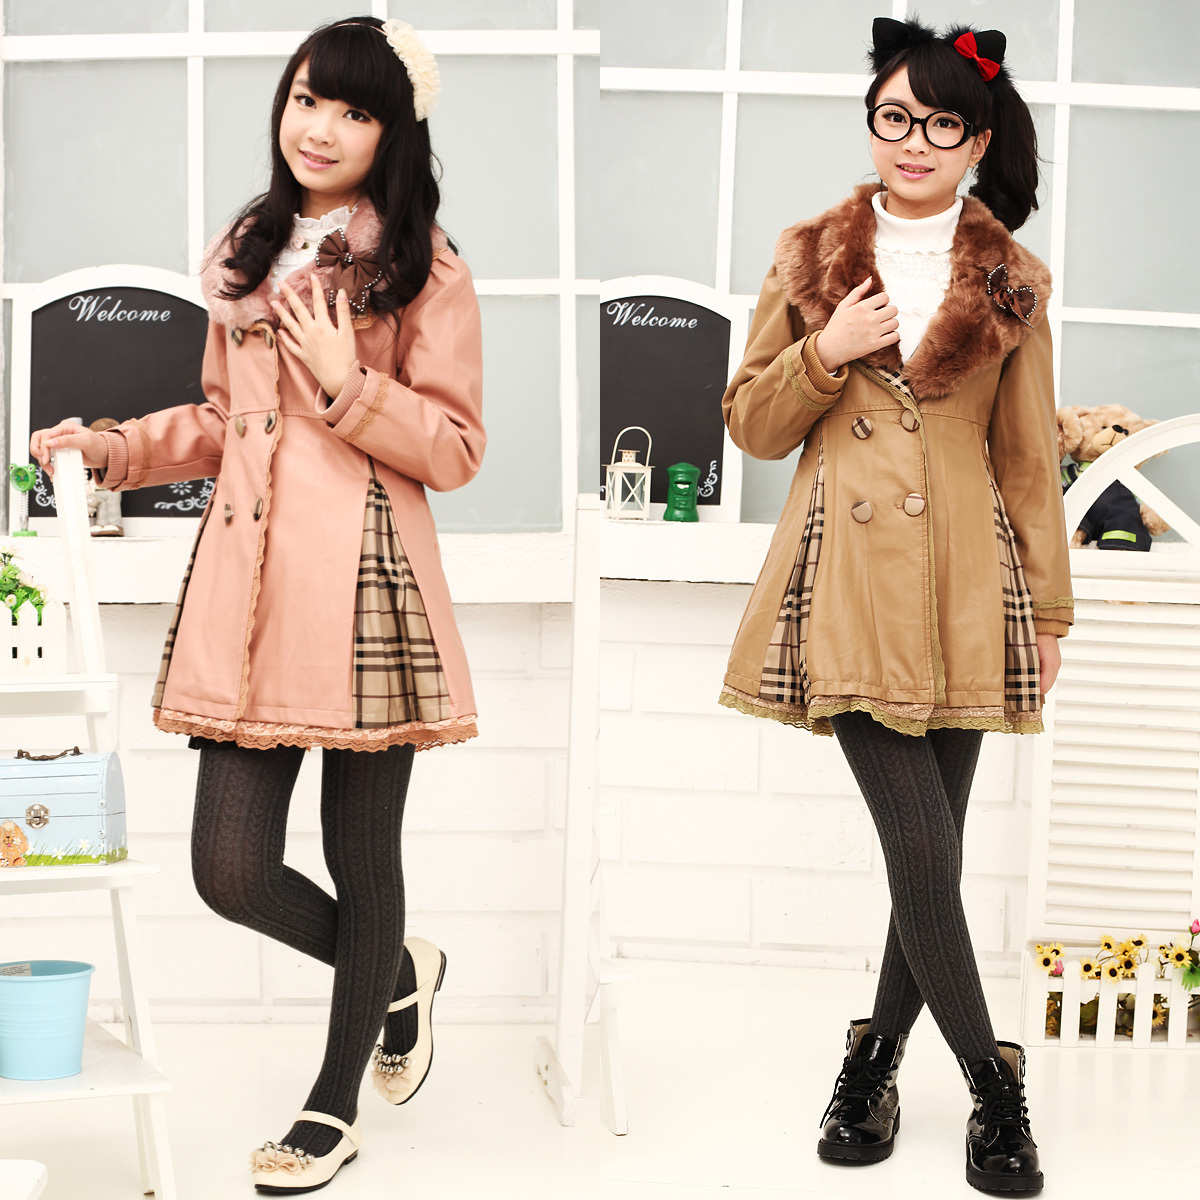 Girls clothing autumn and winter 2012 child women's child leather clothing outerwear leather trench thickening overcoat